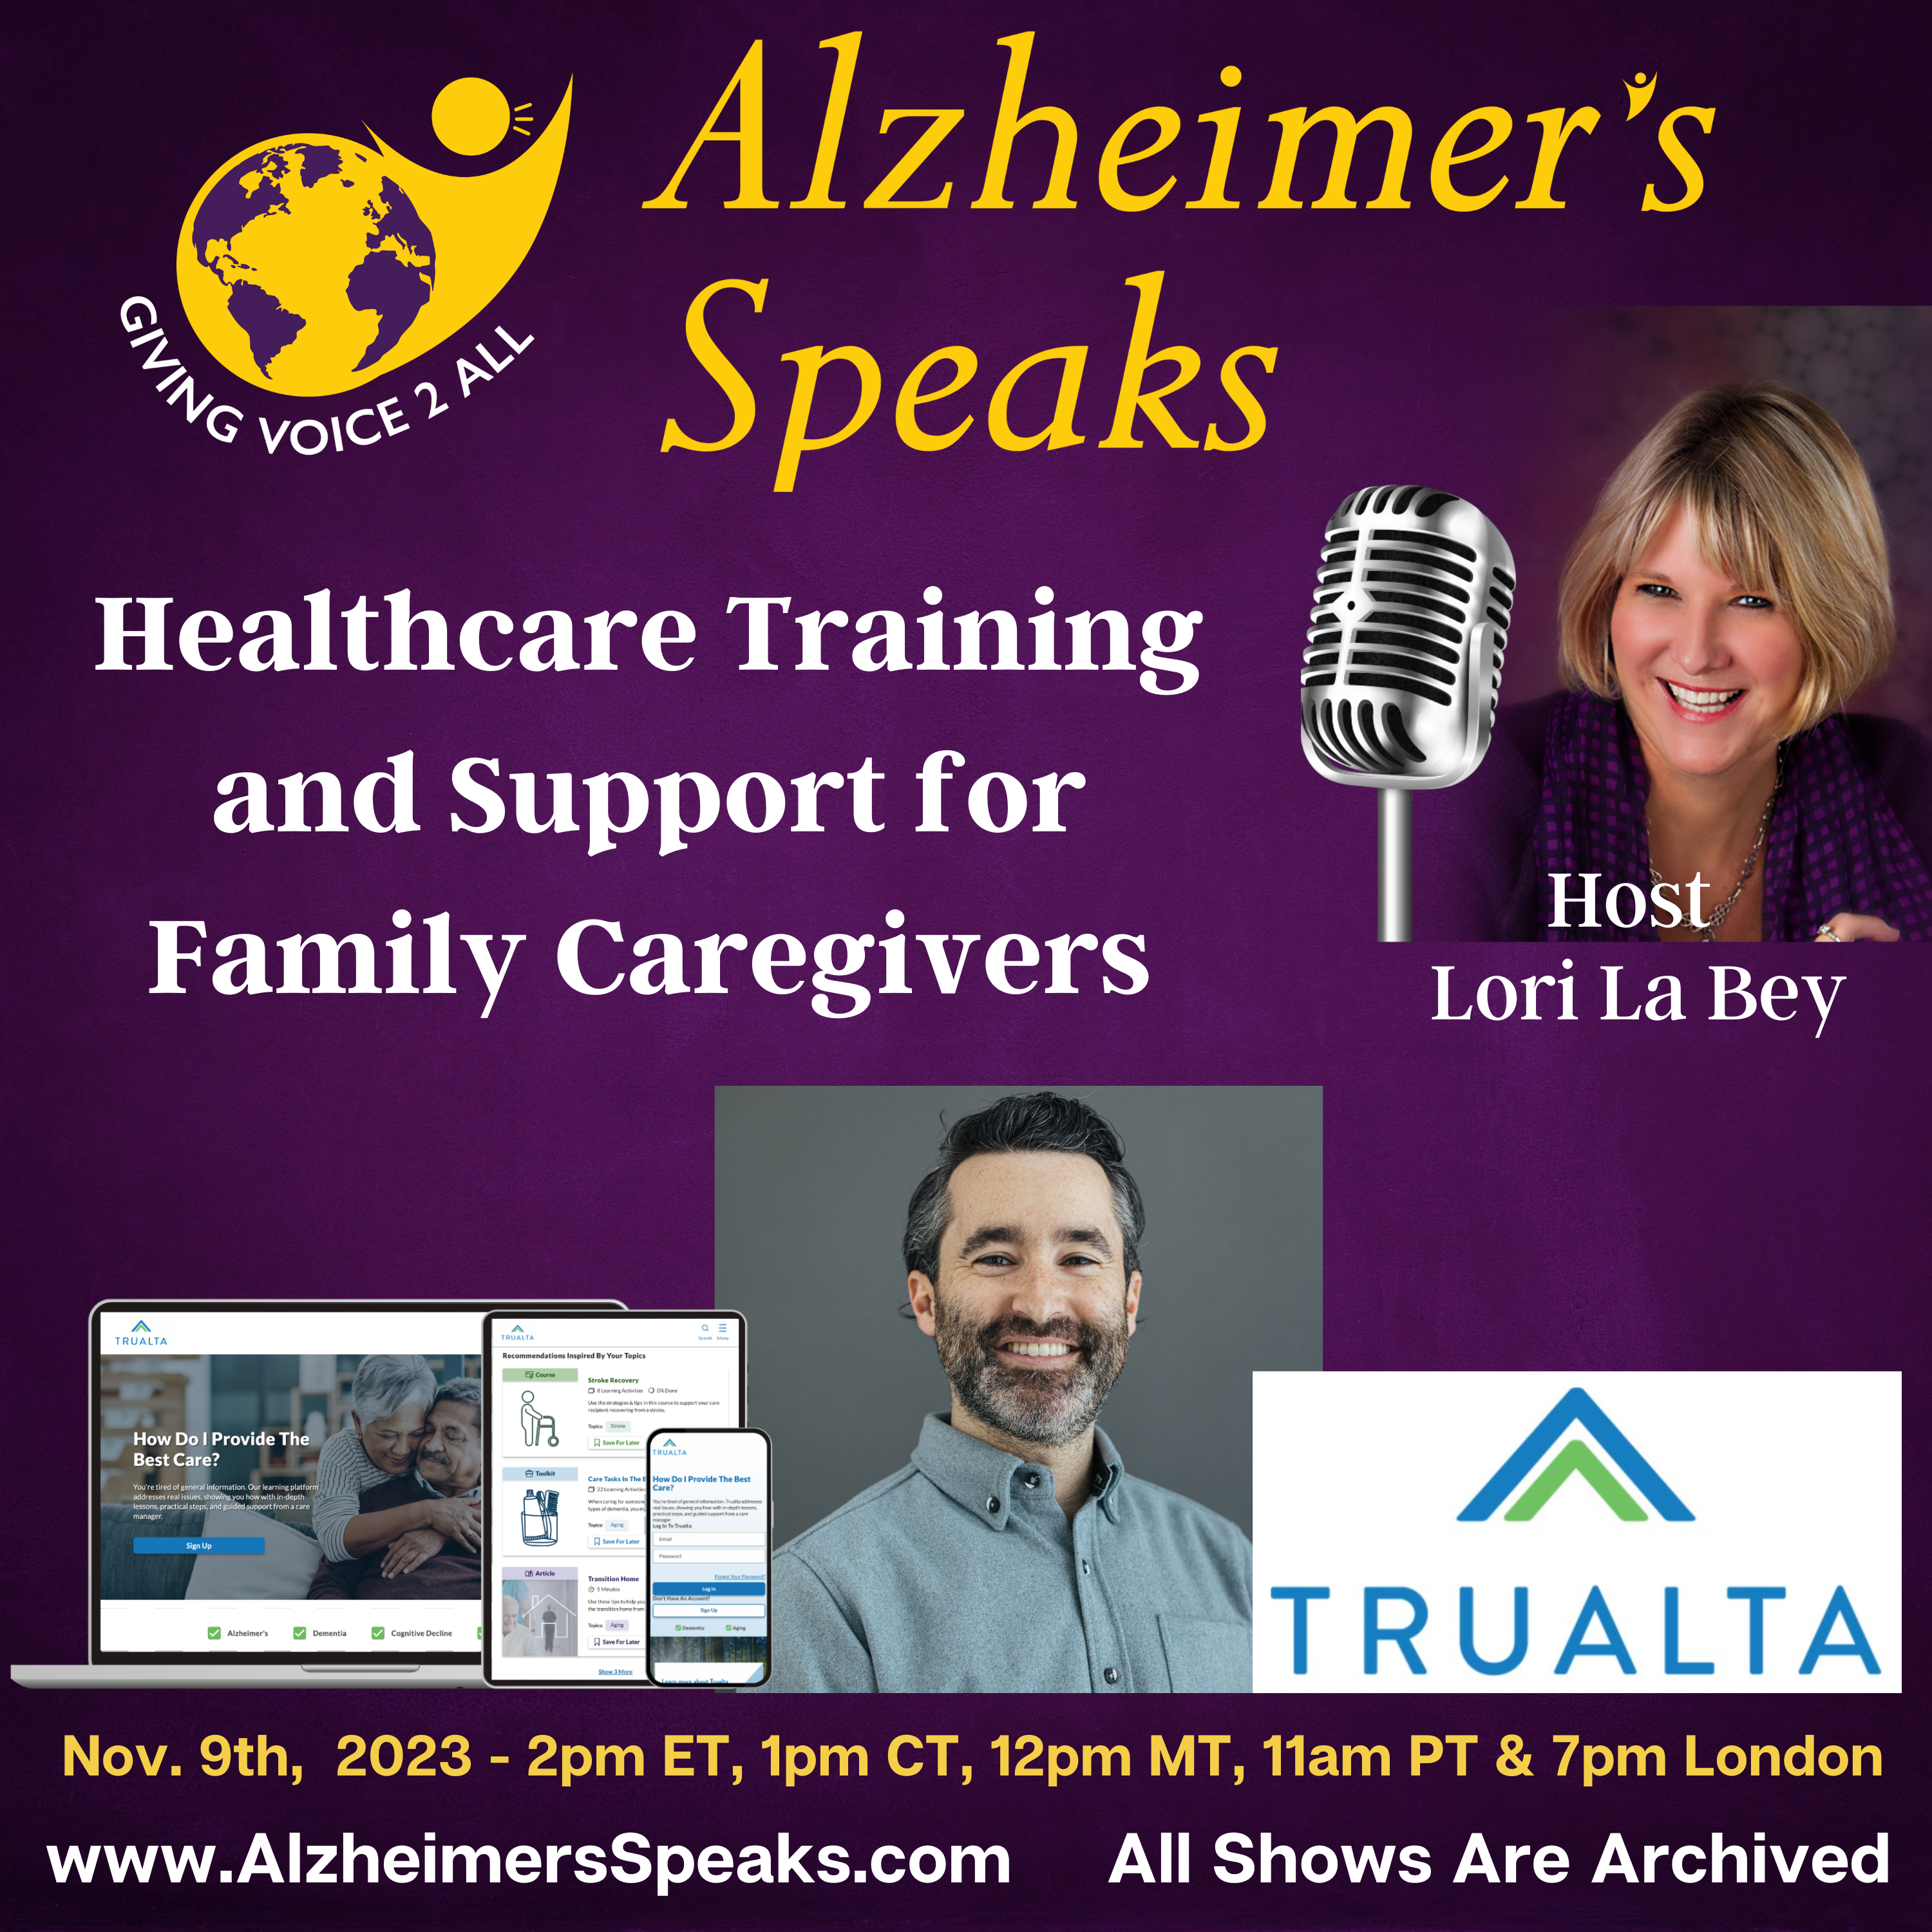 Trualta: Healthcare Training and Support for Family Caregivers